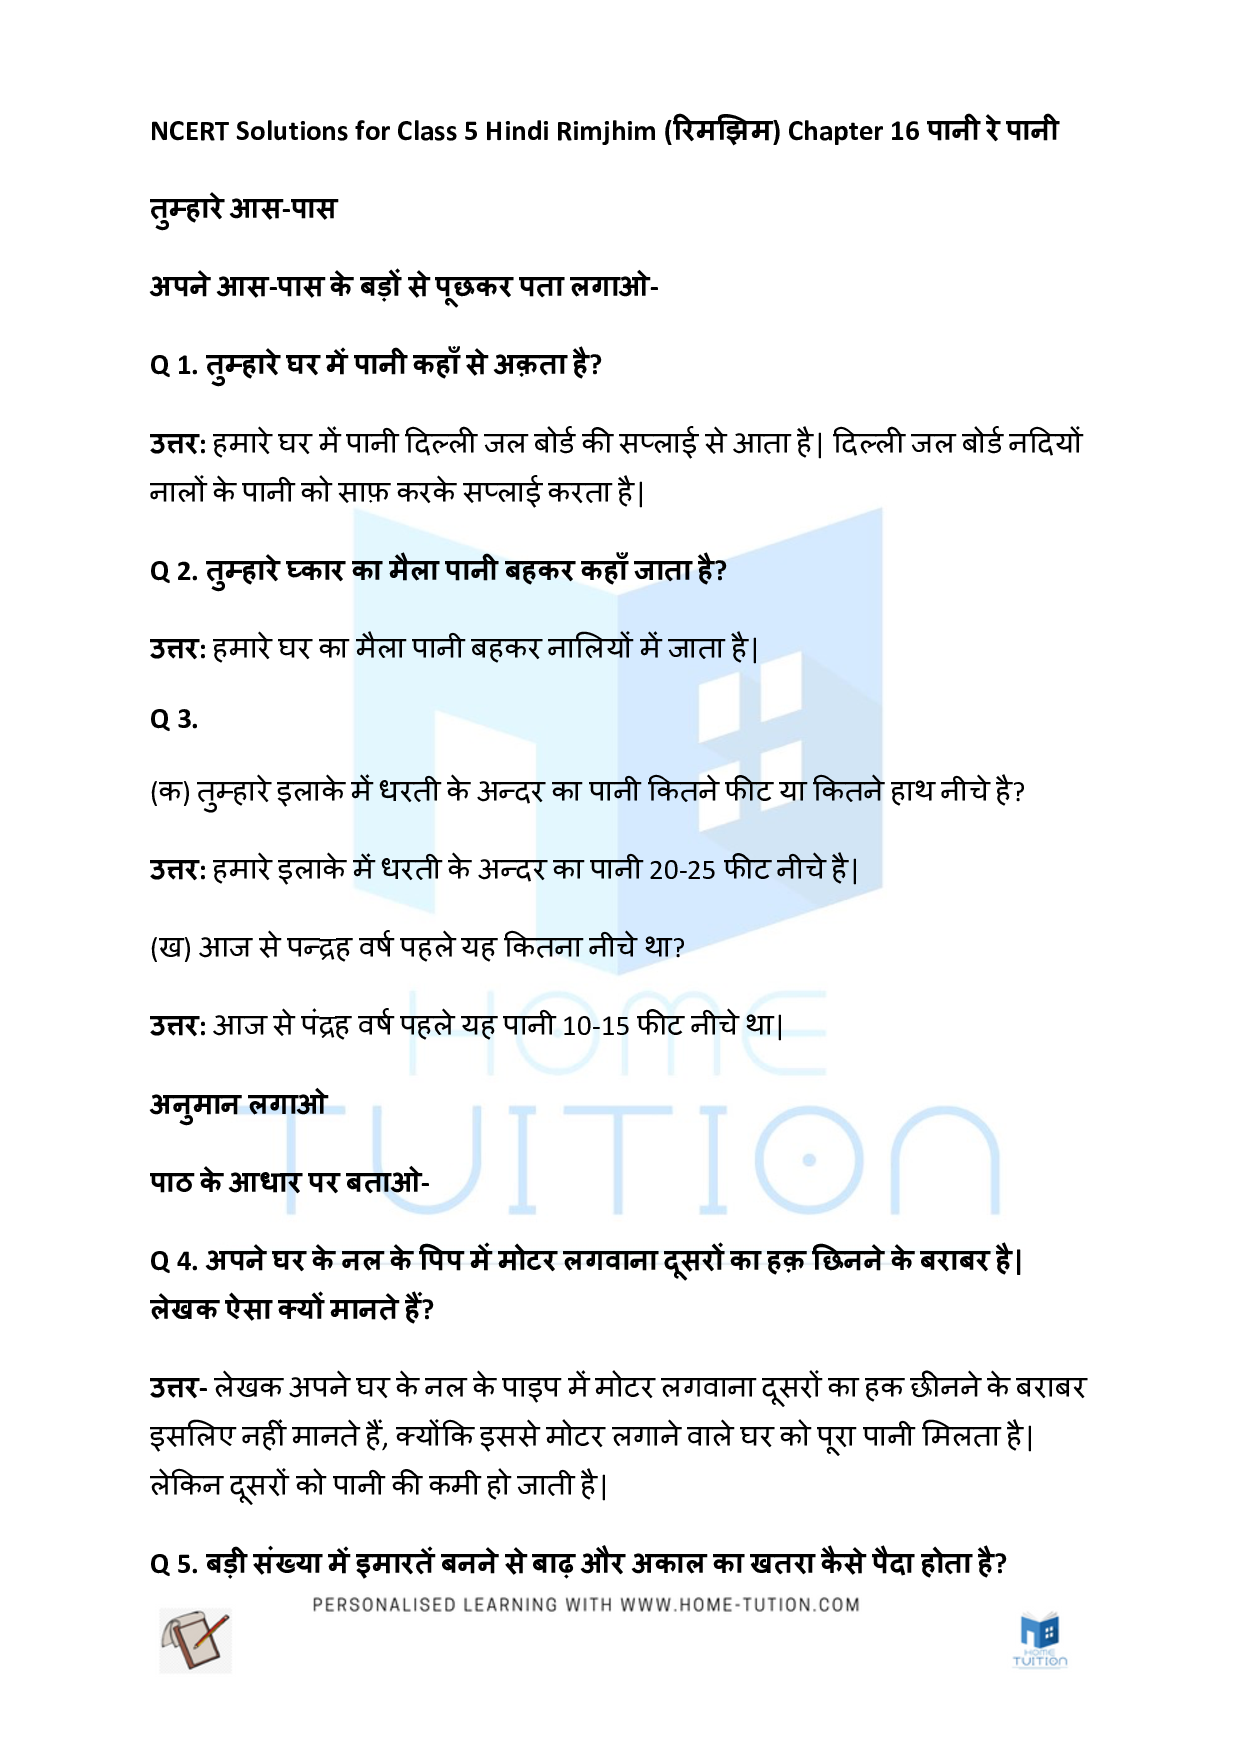 NCERT Solutions for Class 5 Hindi Rimjhim  Chapter 16 पानी रे पानी